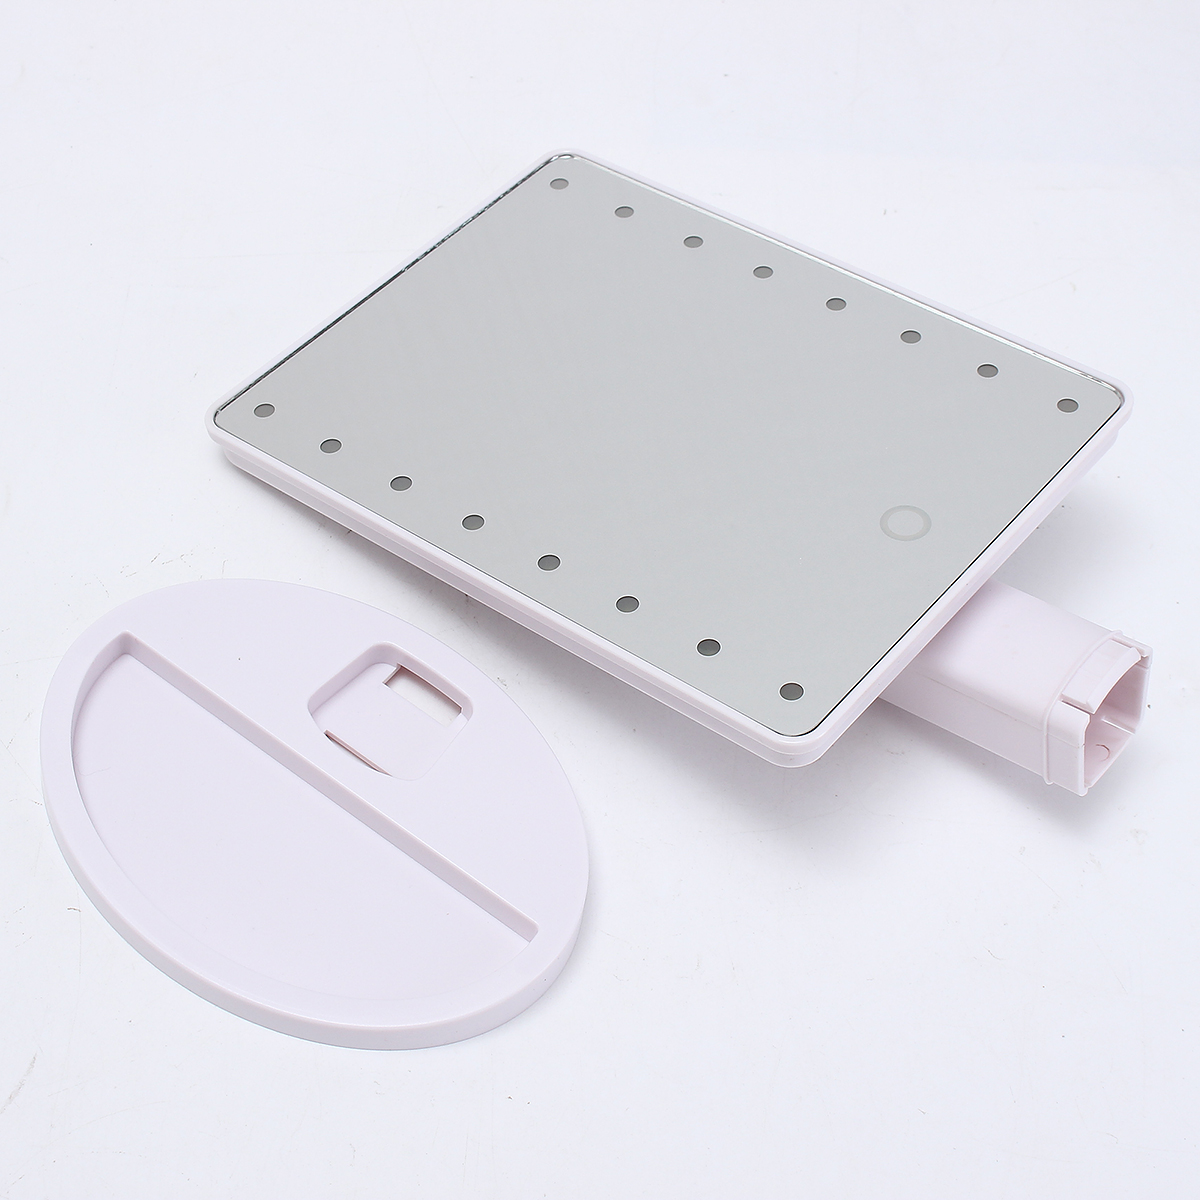 Find Makeup Light Mirror Charminer 16 LEDs Touch Light Illuminated Cosmetic Desktop Vanity Mirror with Stand Handy Touching On/Off for Sale on Gipsybee.com with cryptocurrencies